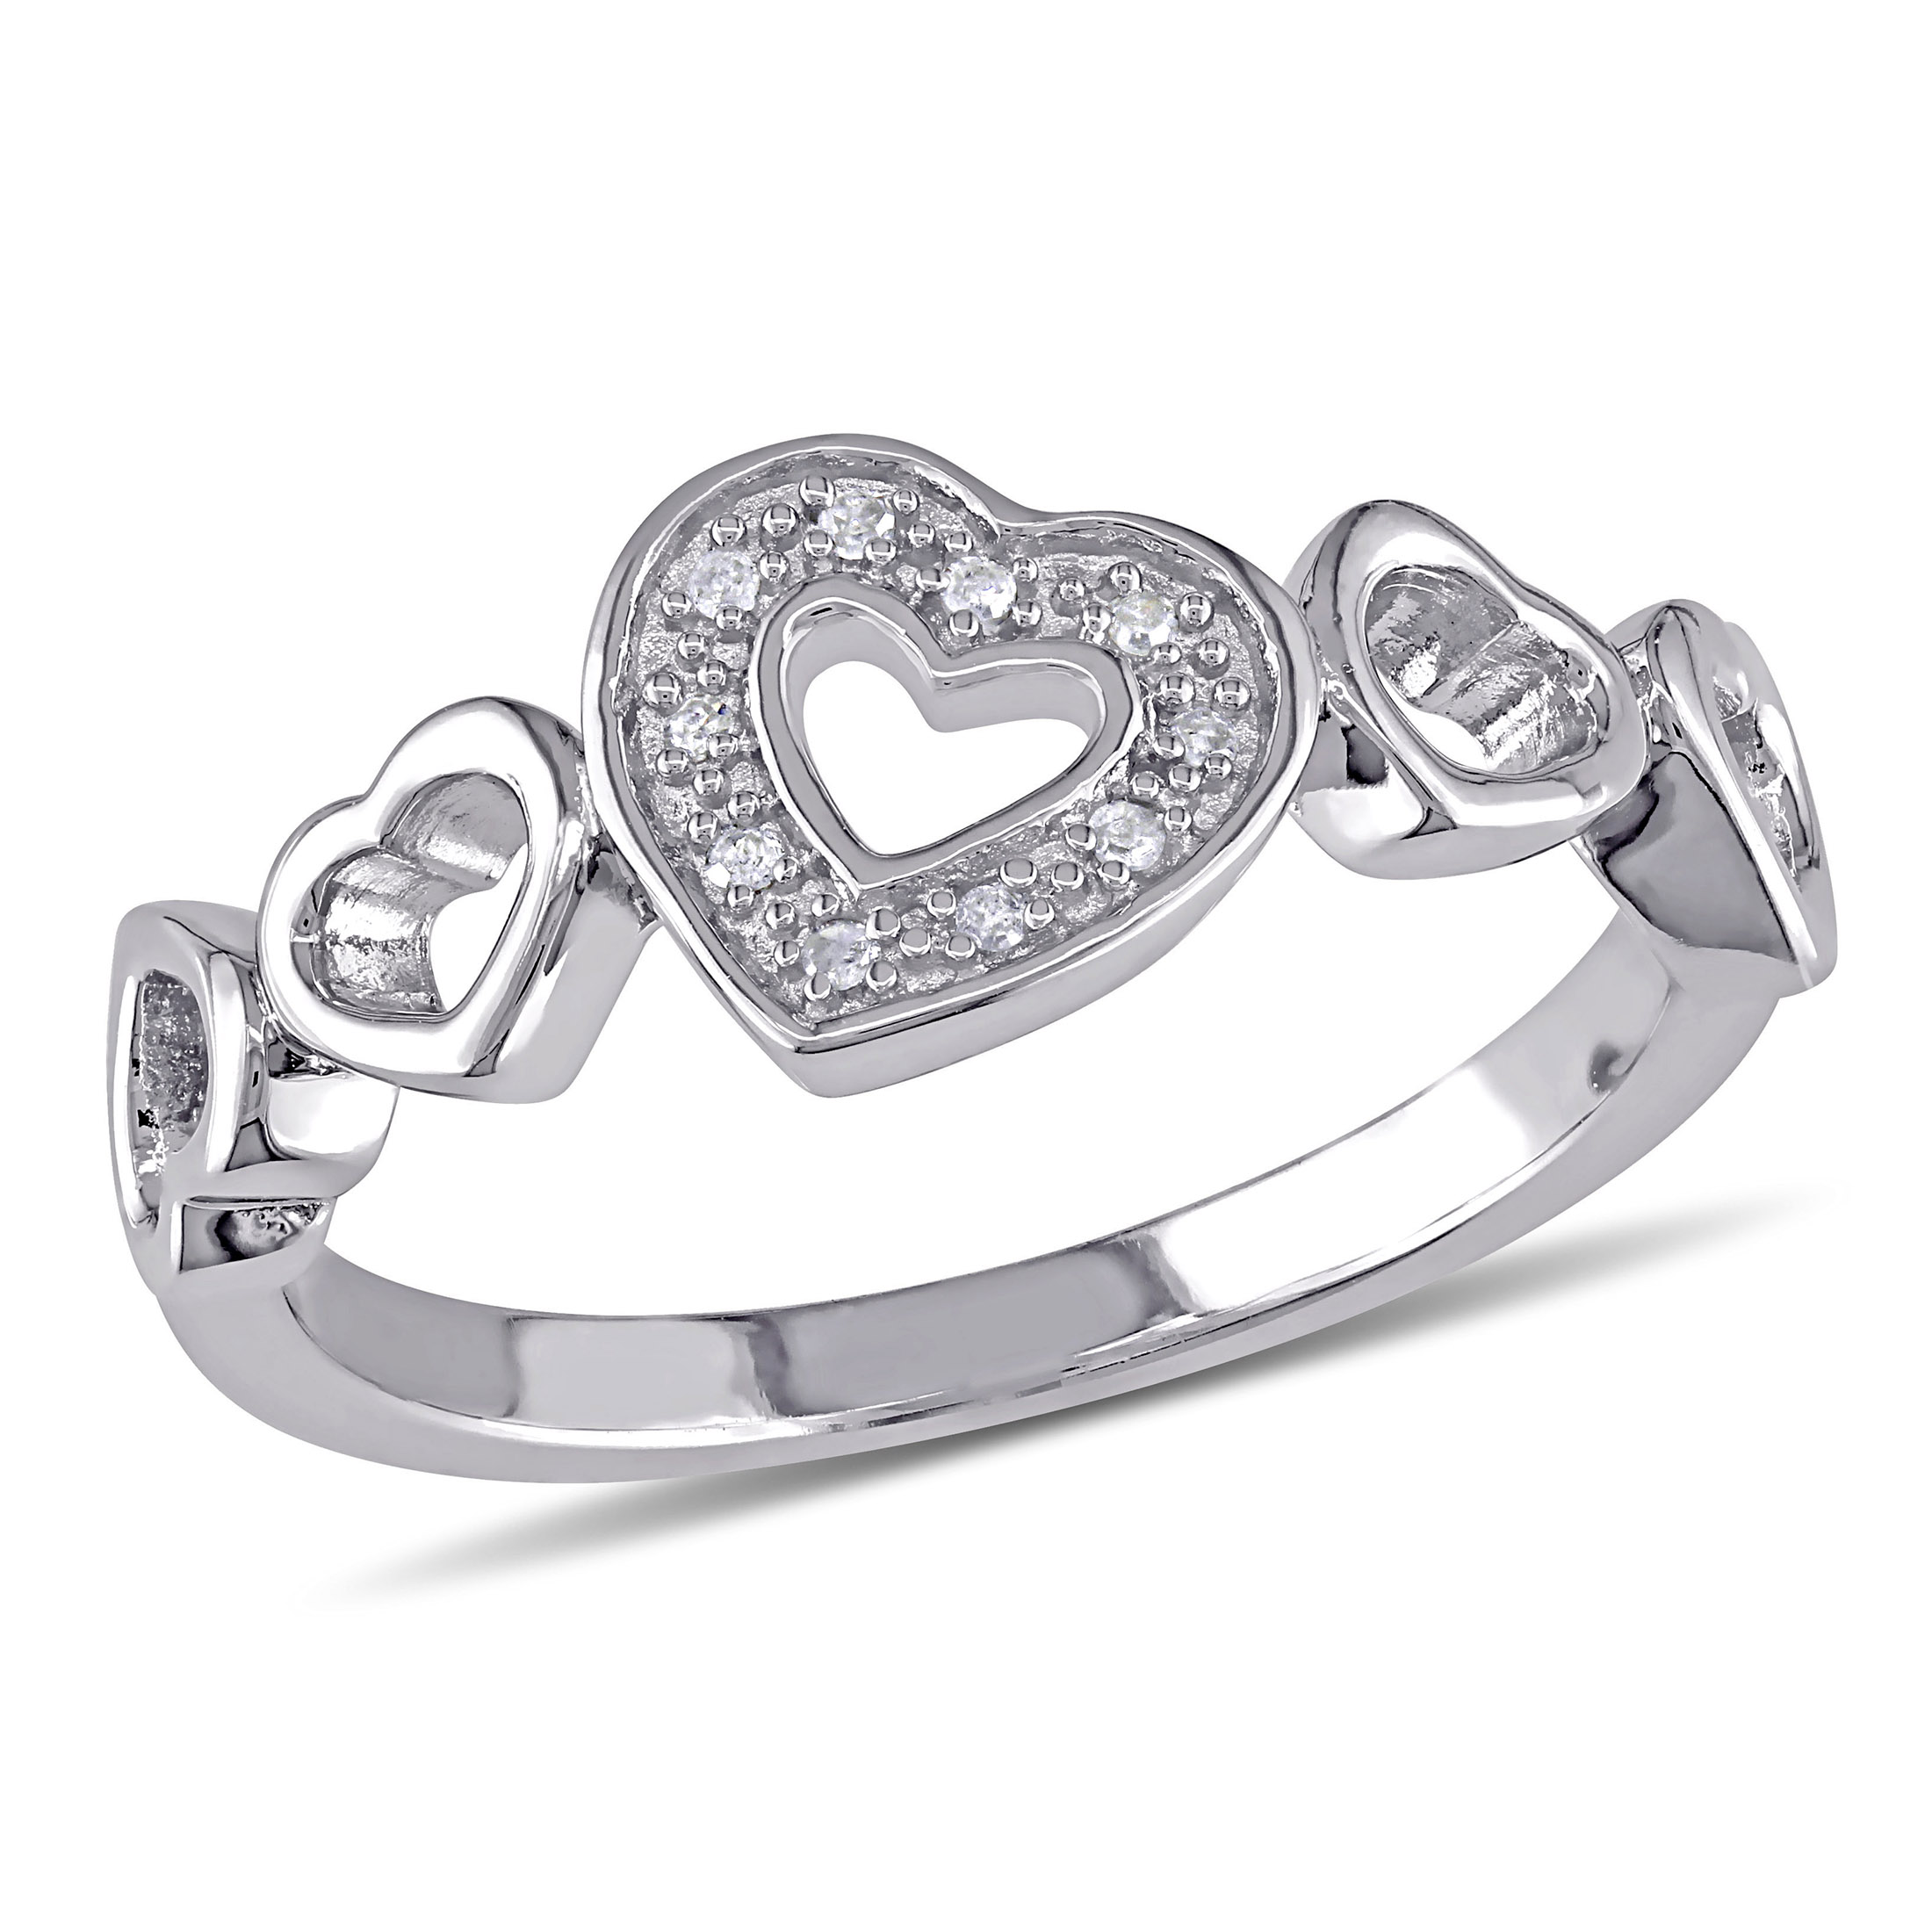 Everly Women's Round-Cut Diamond Accent Sterling Silver 5-Heart Fashion Ring with Pave Setting (H-I-J, I3) - image 1 of 8